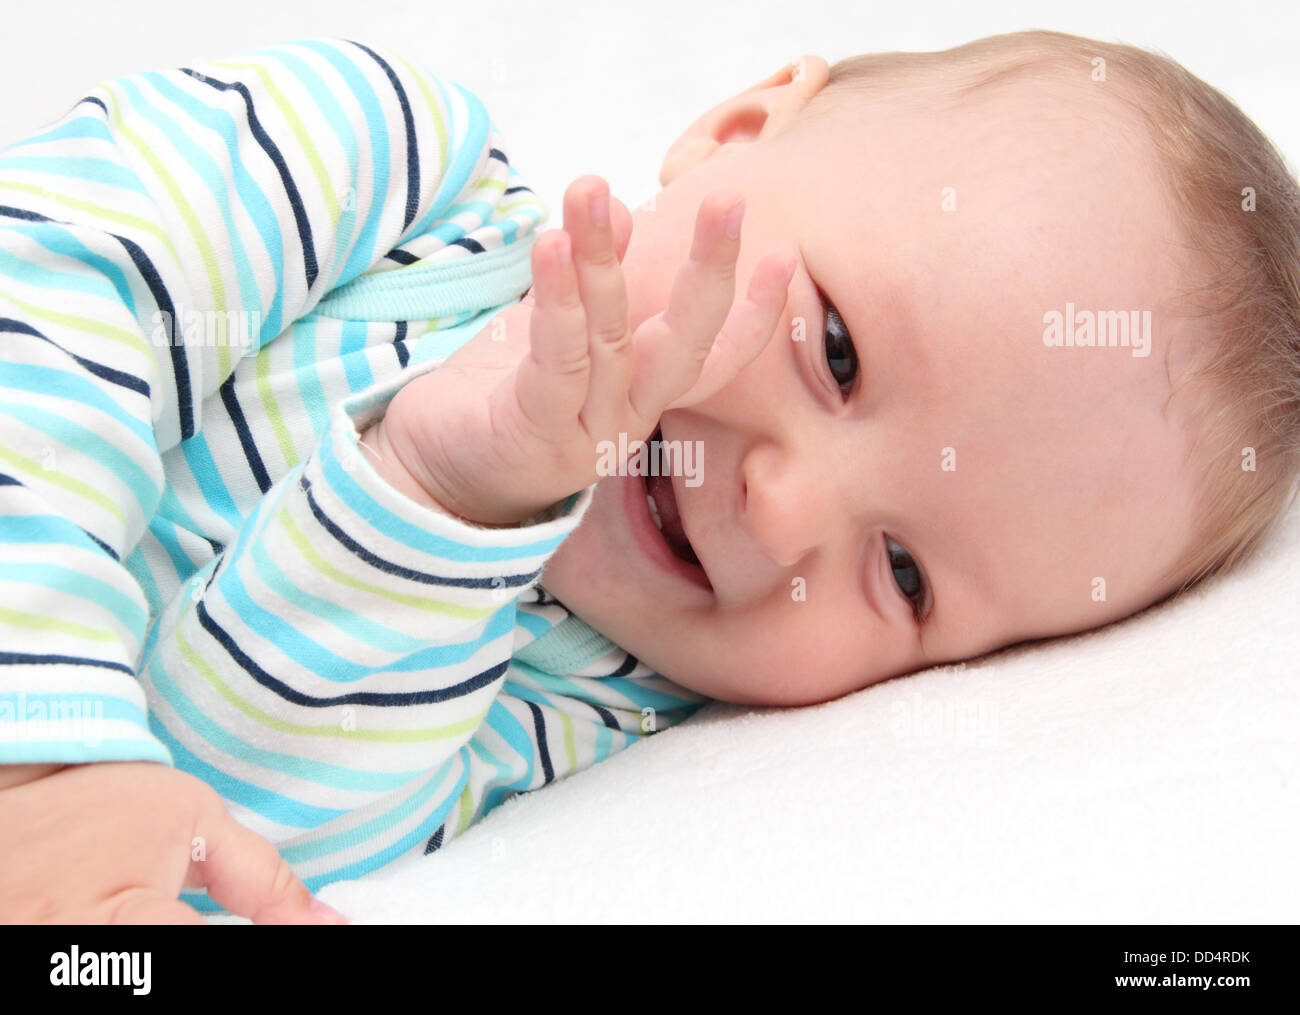 little baby laughing Stock Photo